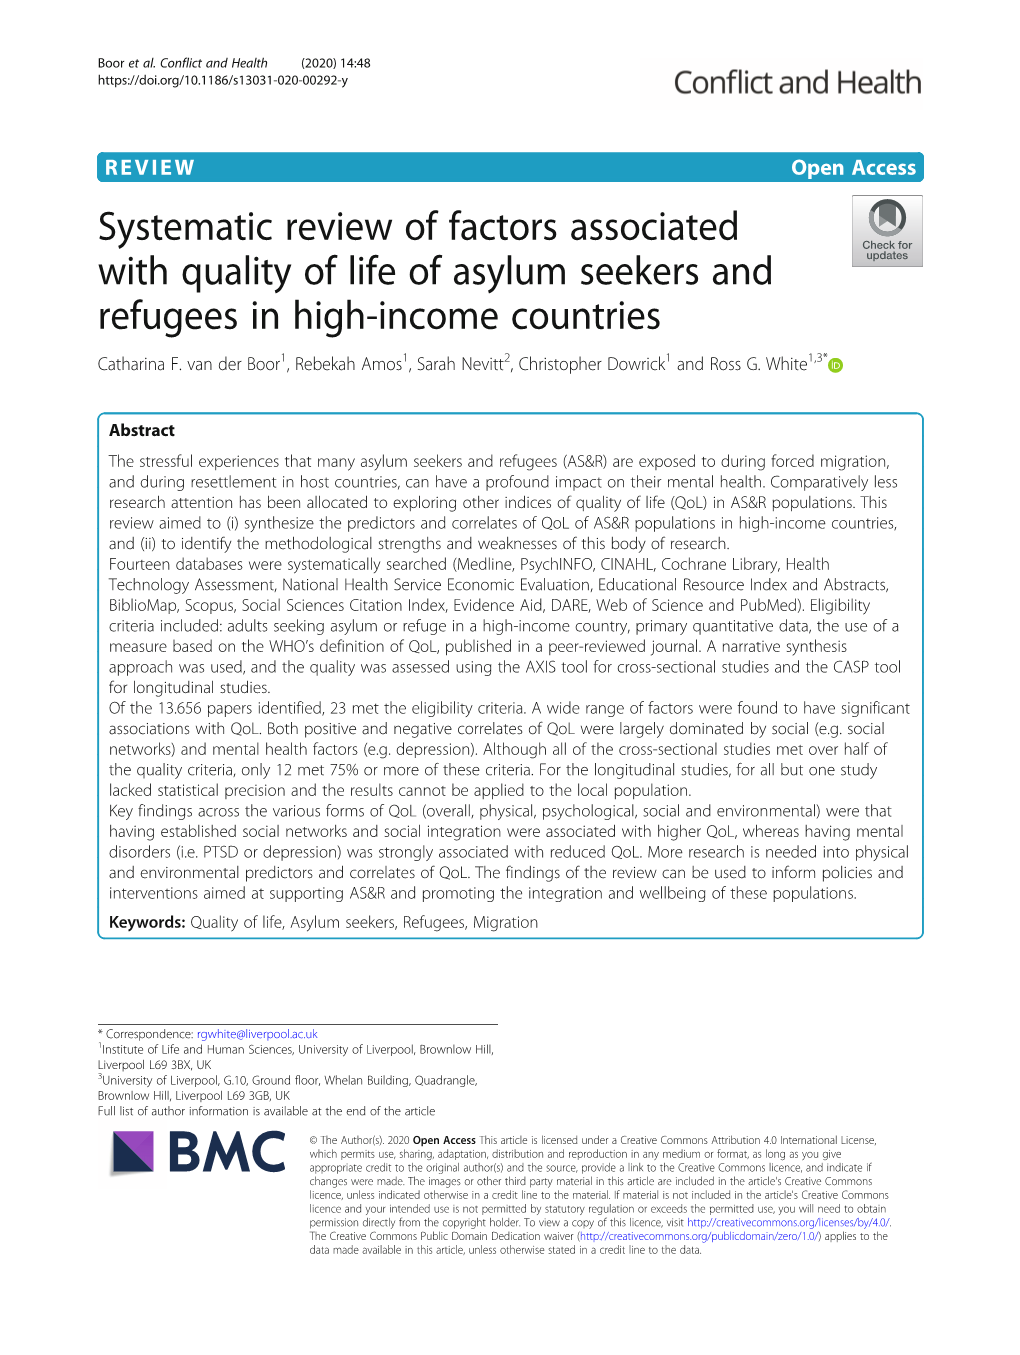 Systematic Review of Factors Associated with Quality of Life of Asylum Seekers and Refugees in High-Income Countries Catharina F